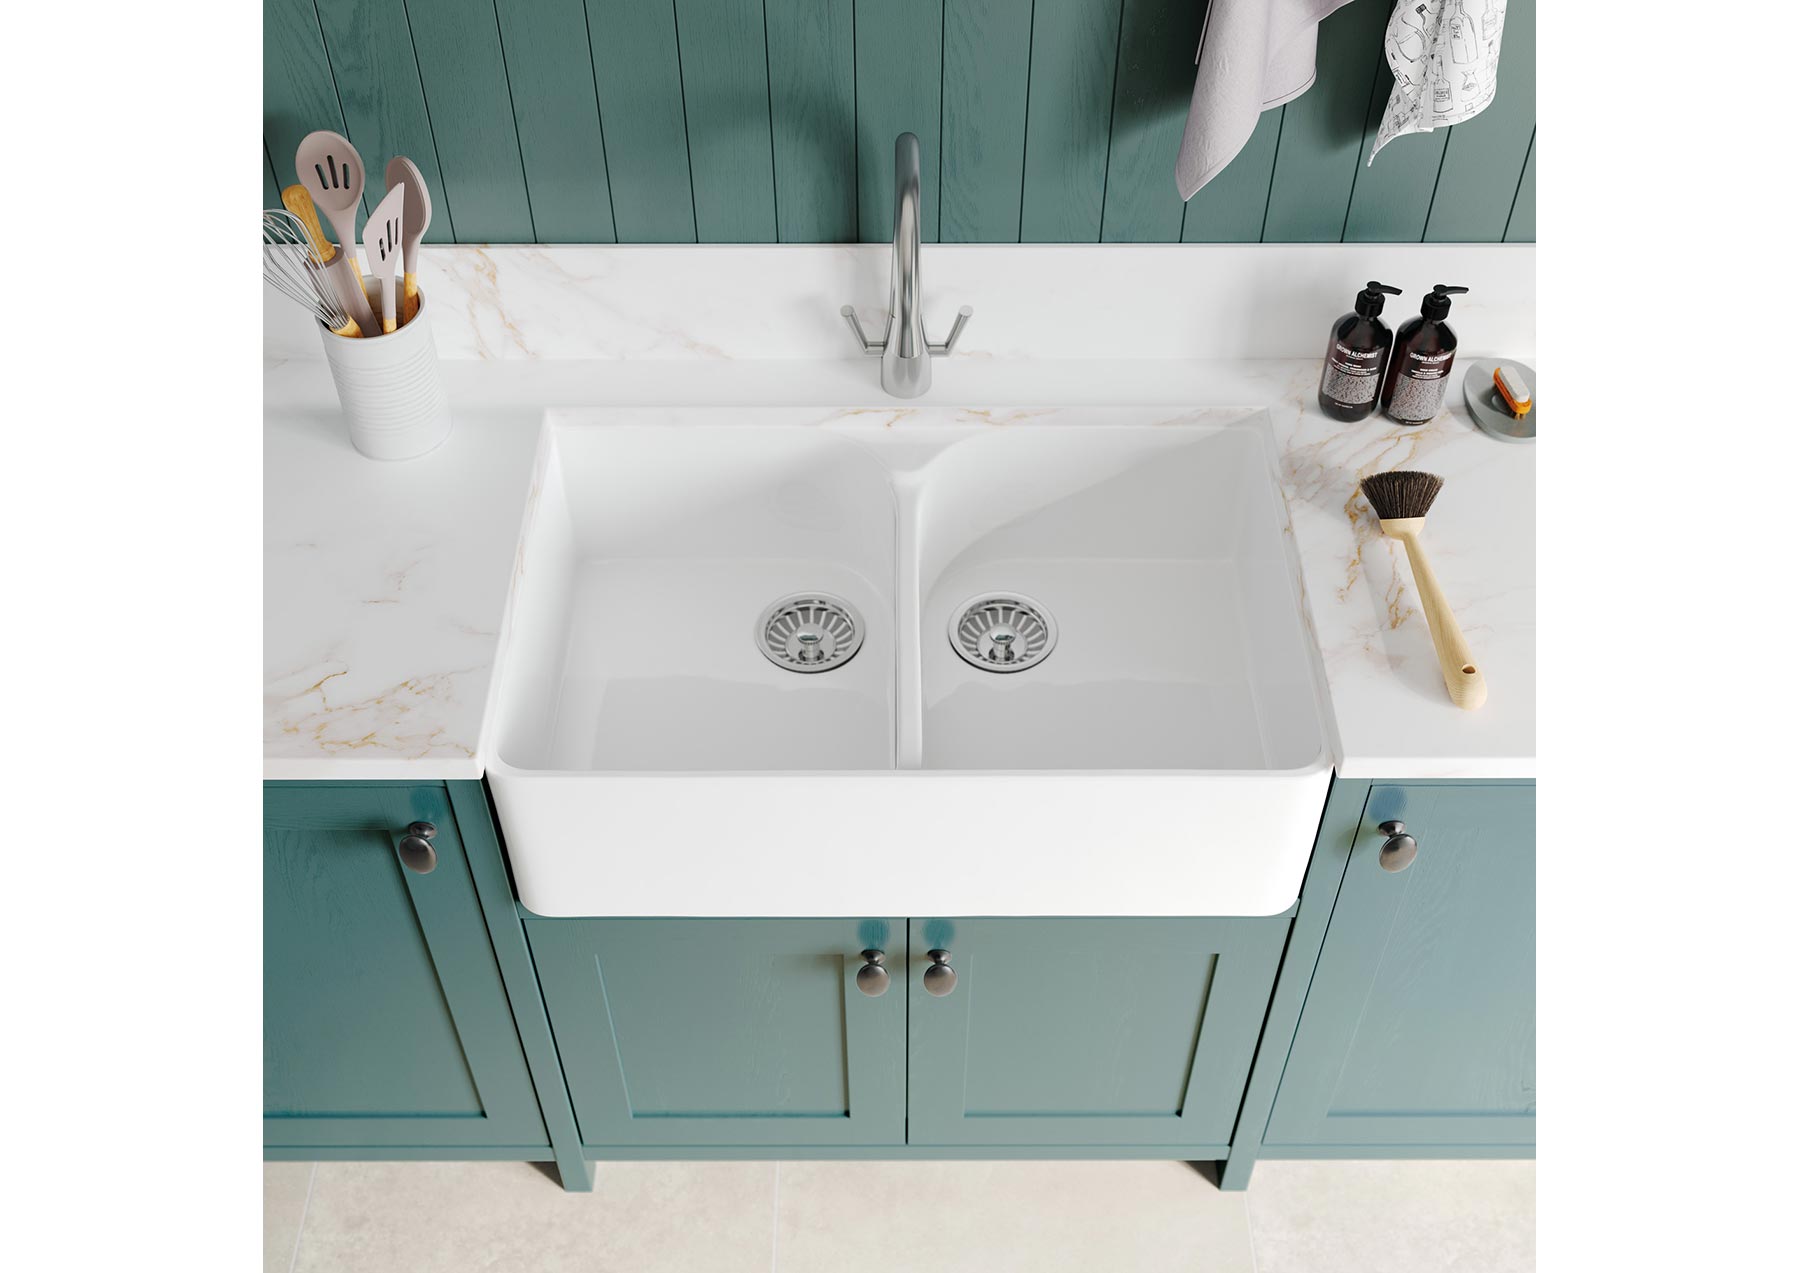 Contemporary two bowl belfast sink in shaker style kitchen